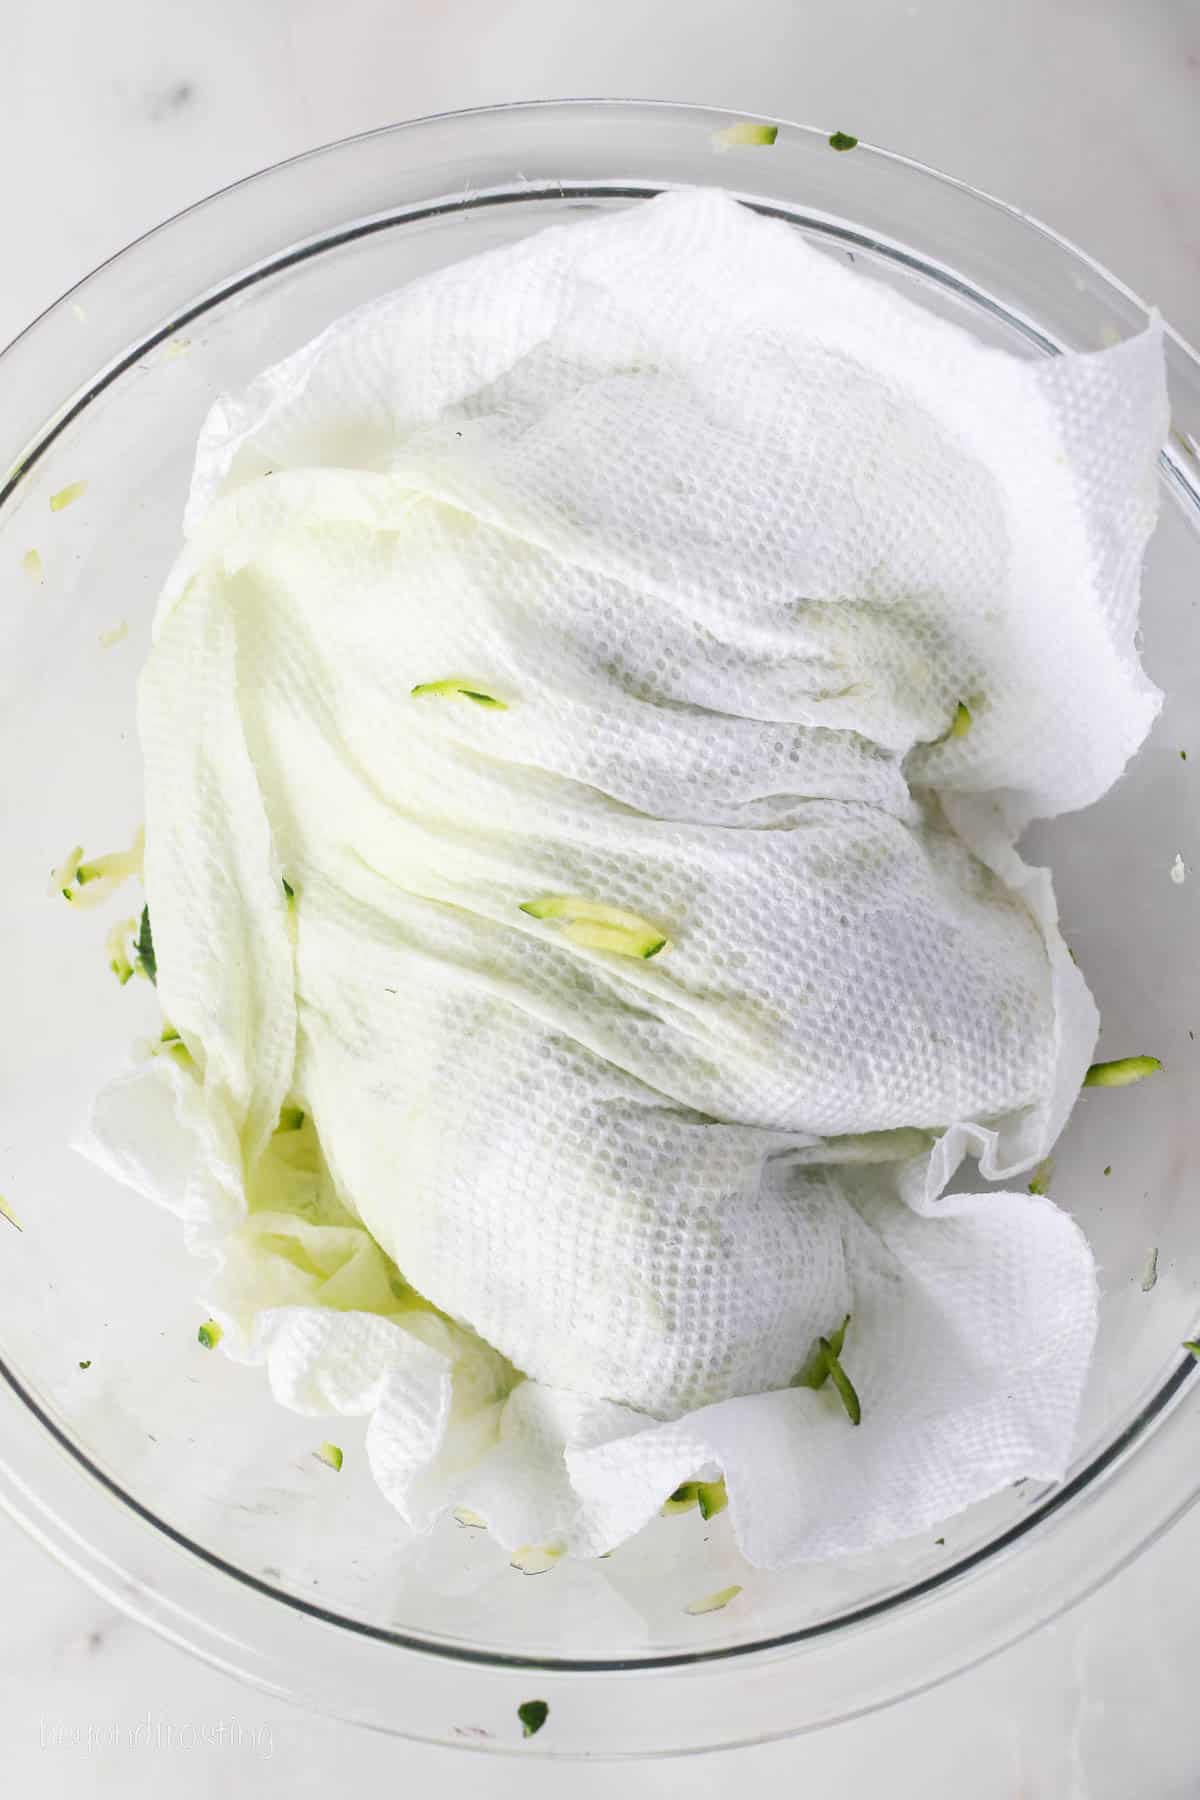 Paper towels pressed over a bowl of shredded zucchini.